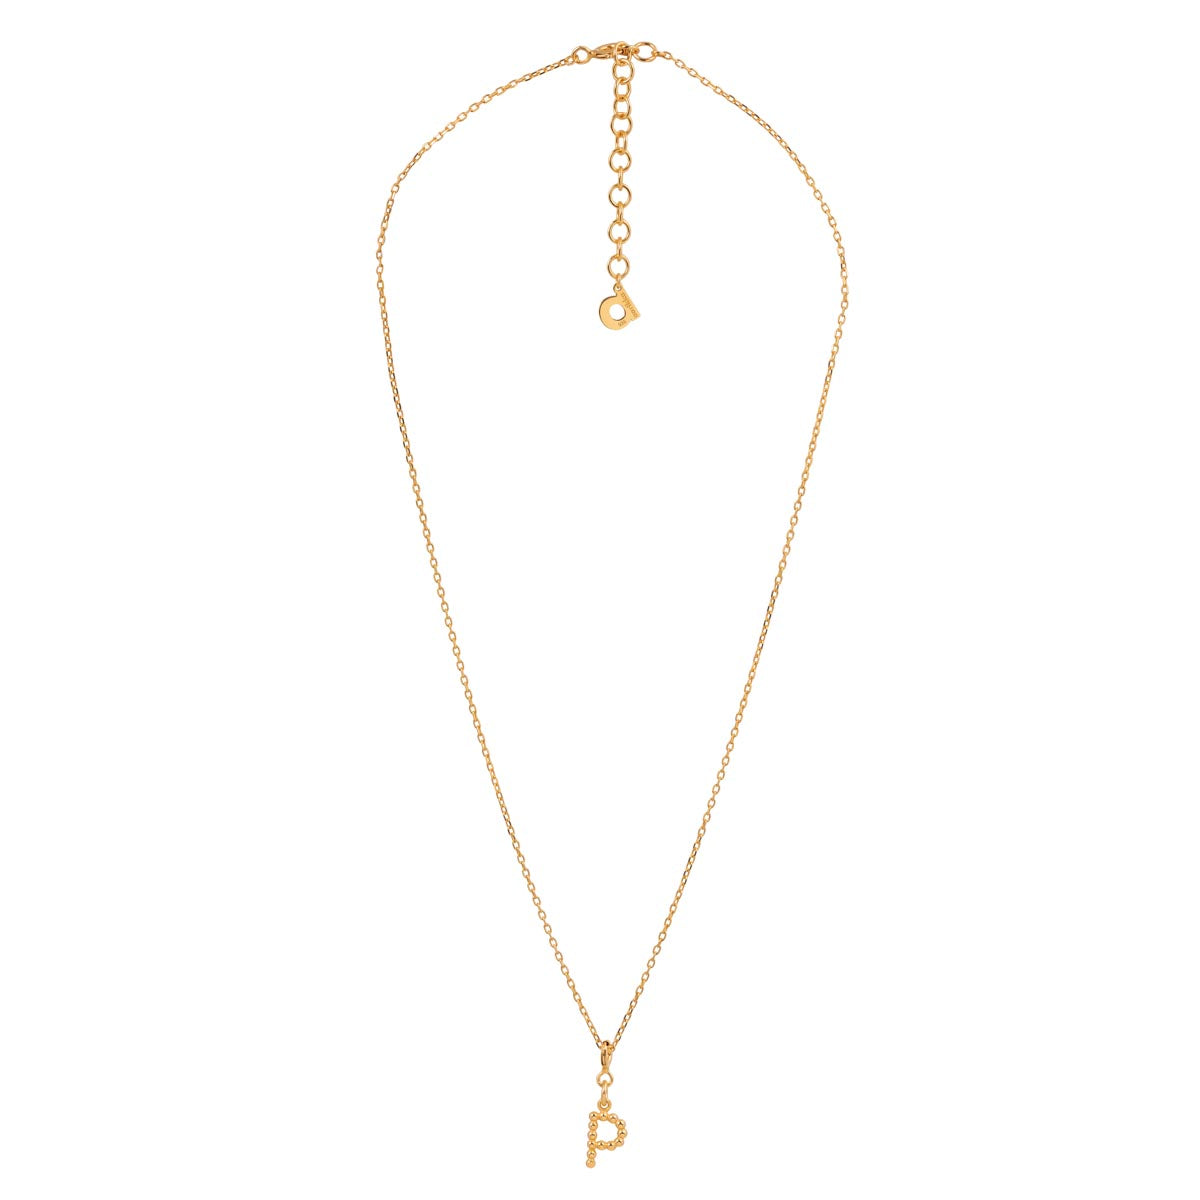 Yllätys Monogram Necklace P, gold-plated silver